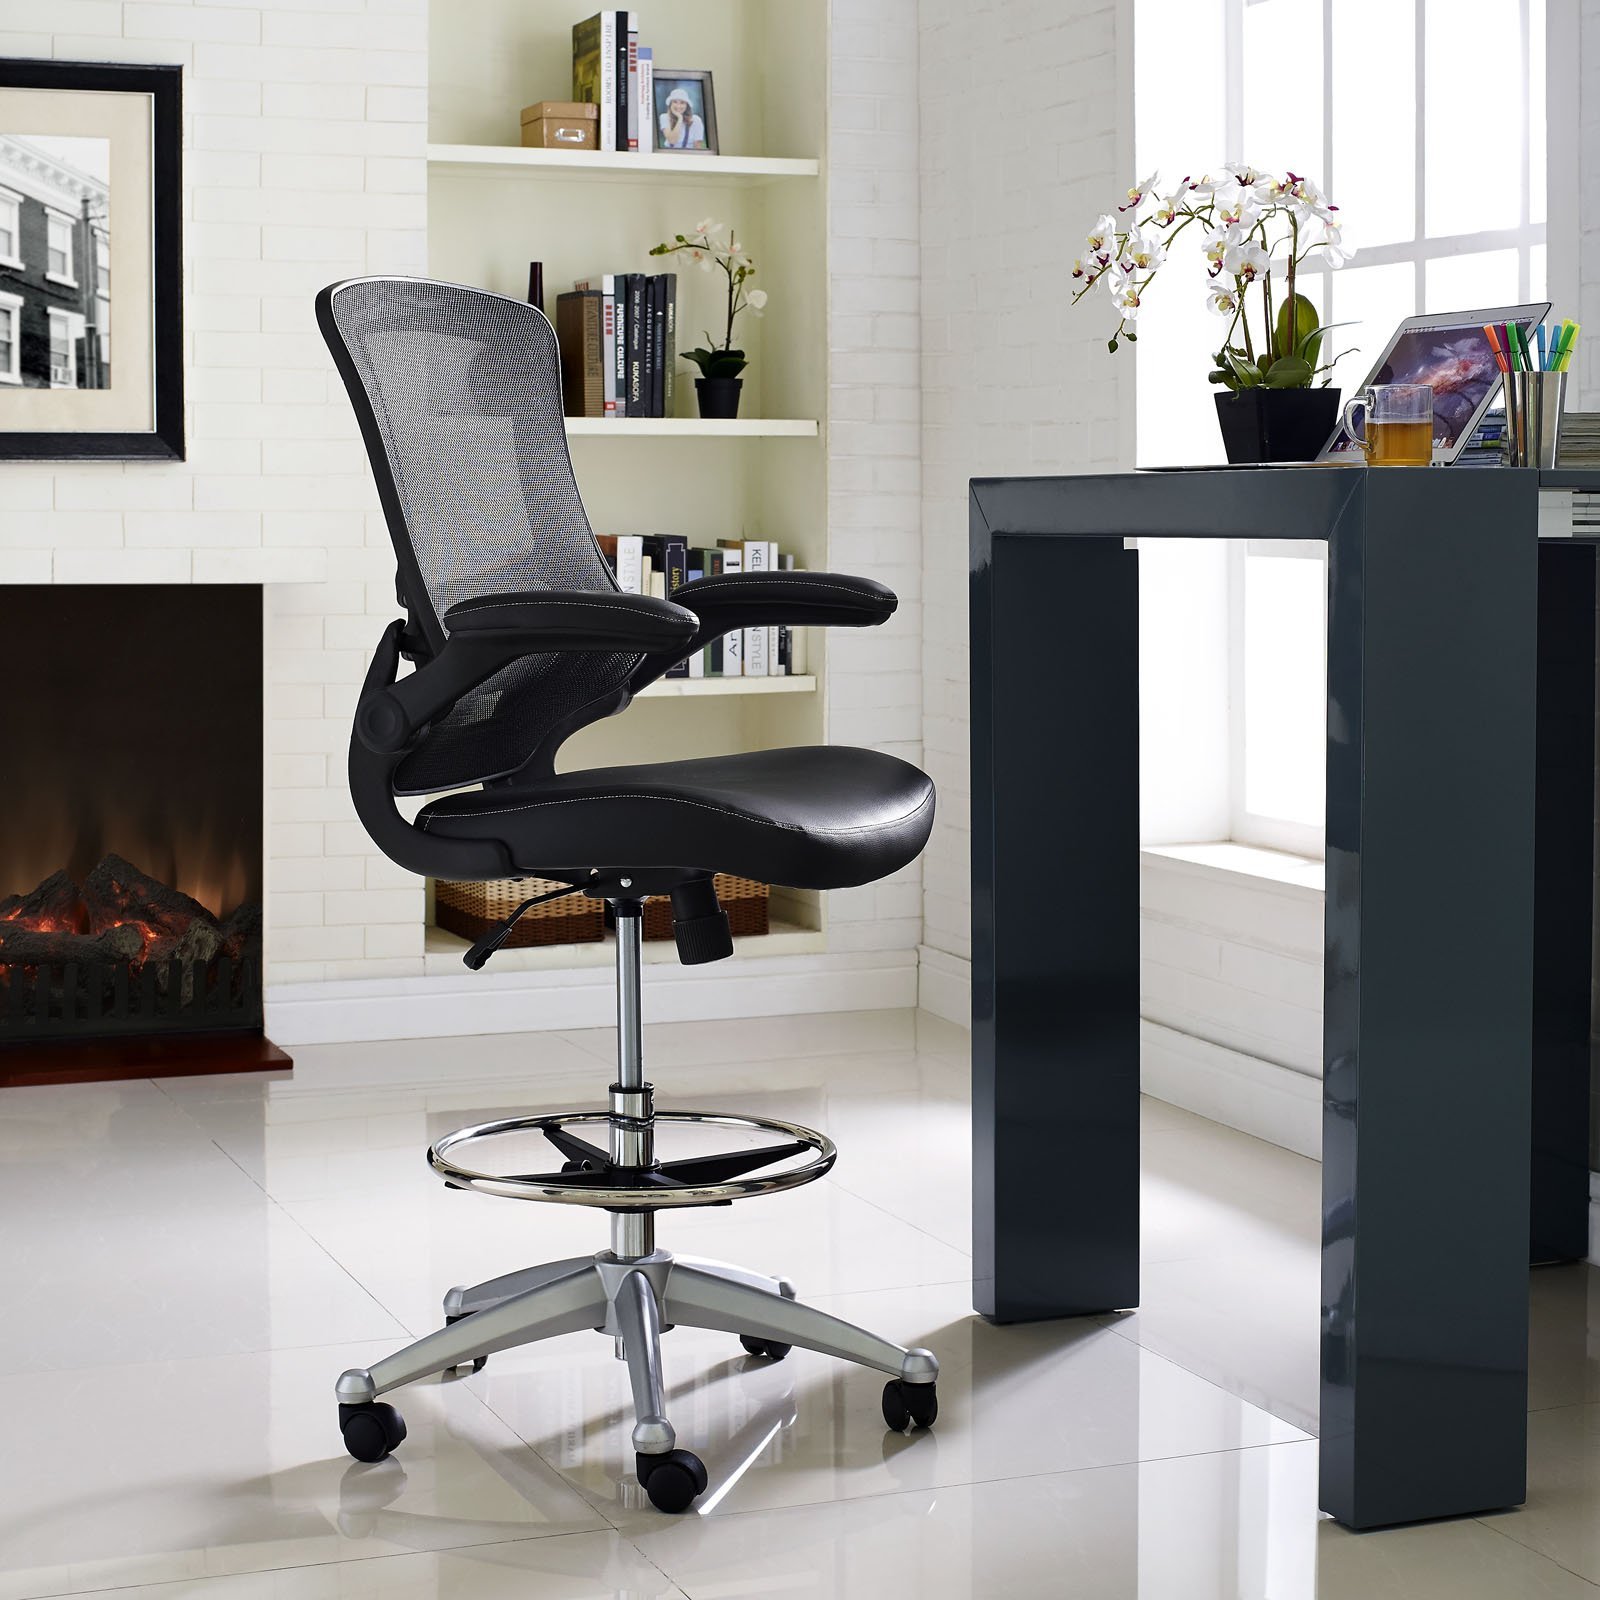 Modway Attainment Drafting Chair In Black - Tall Office Chair For Adjustable Standing Desks - Drafting Stool With Flip-Up Arm Drafting Table Chair - $179.95